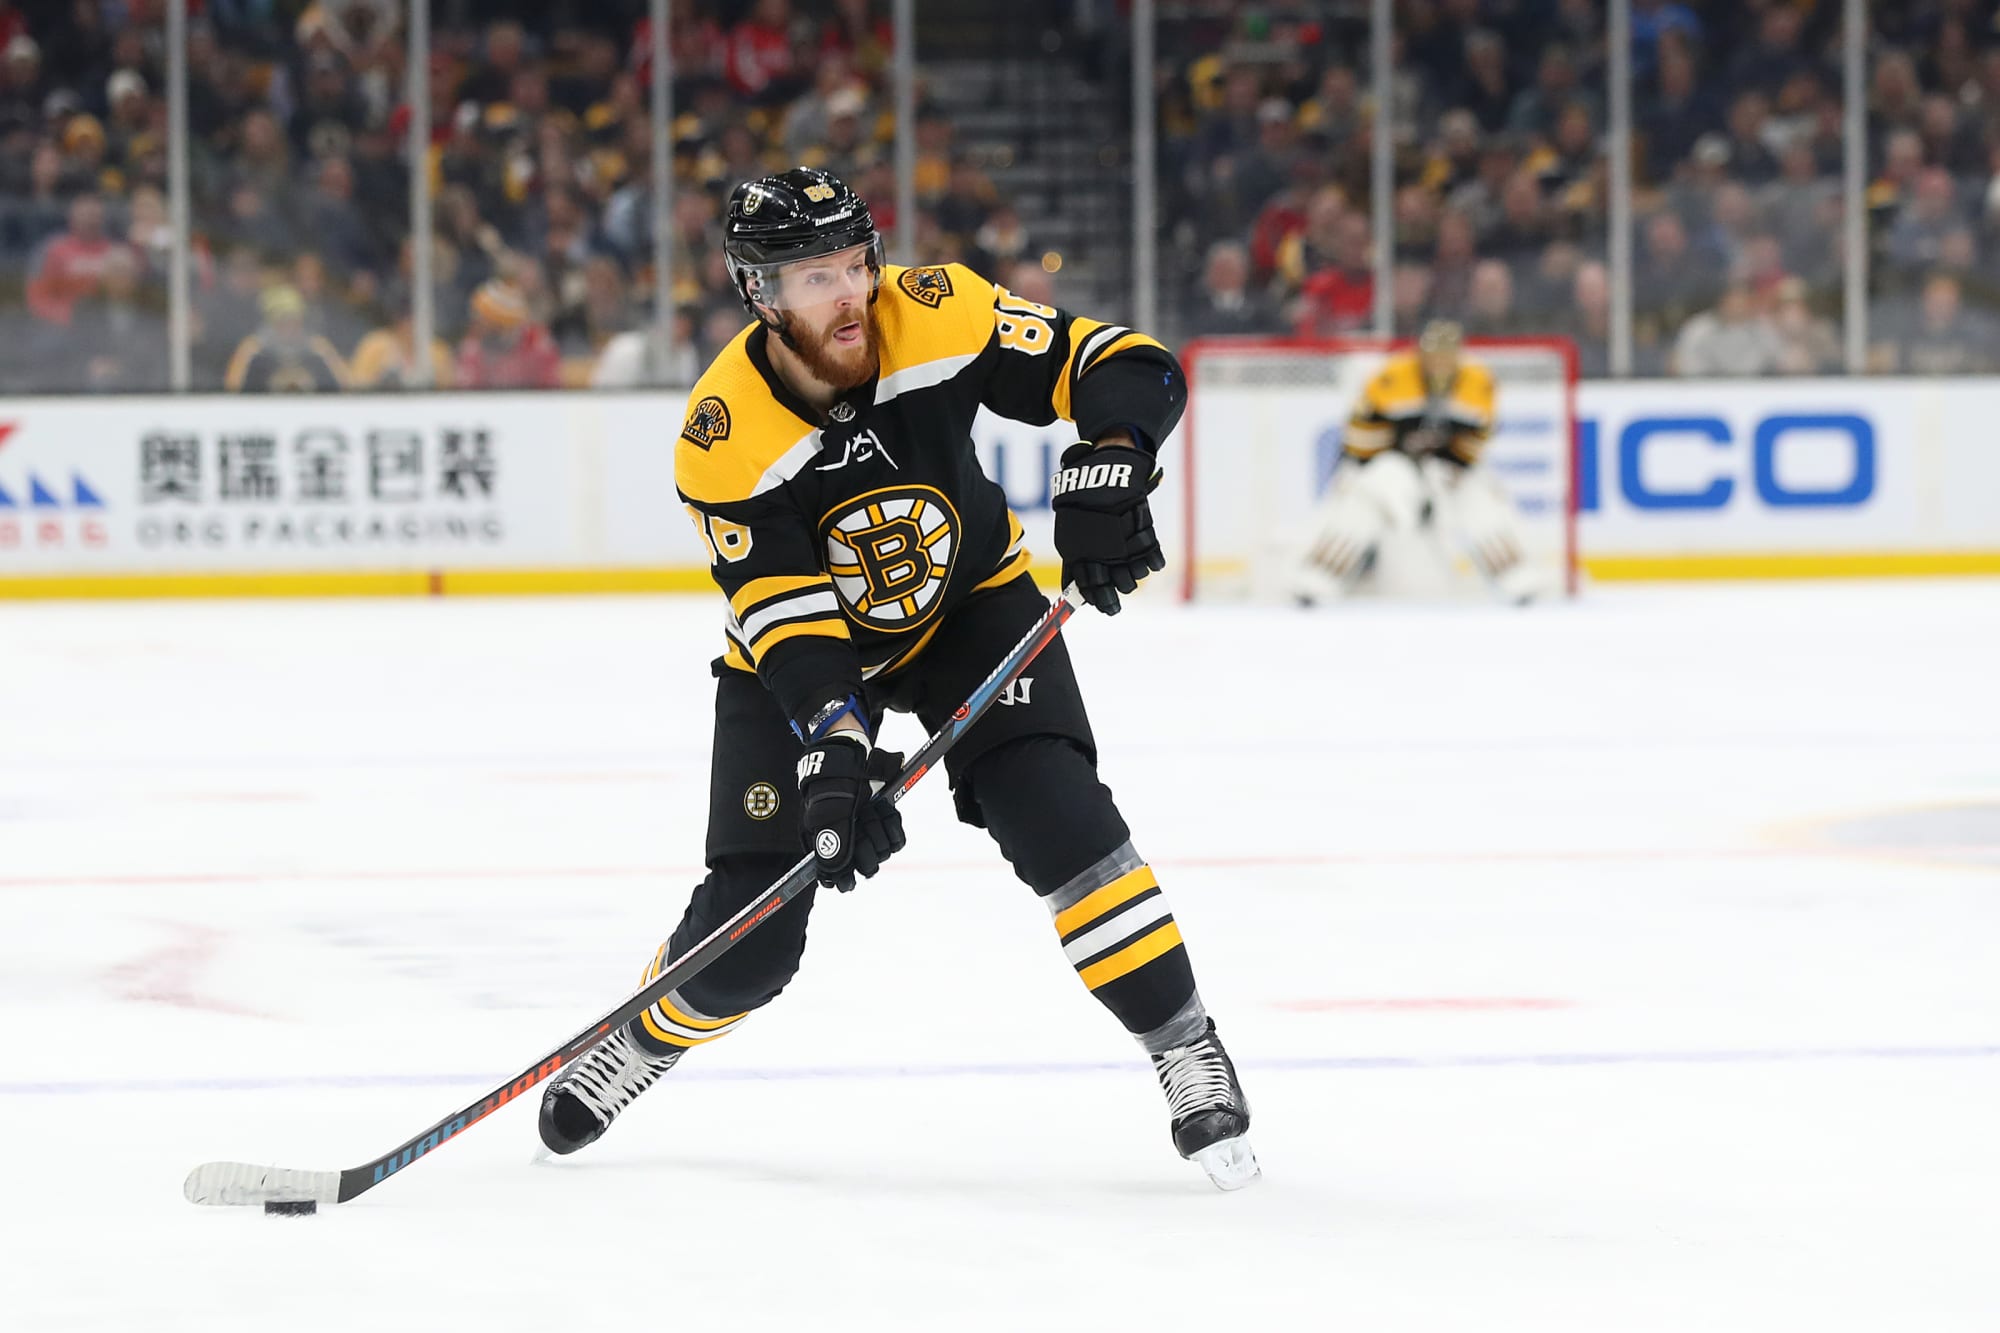 Boston Bruins: Kevan Miller ahead of Connor Clifton on depth chart